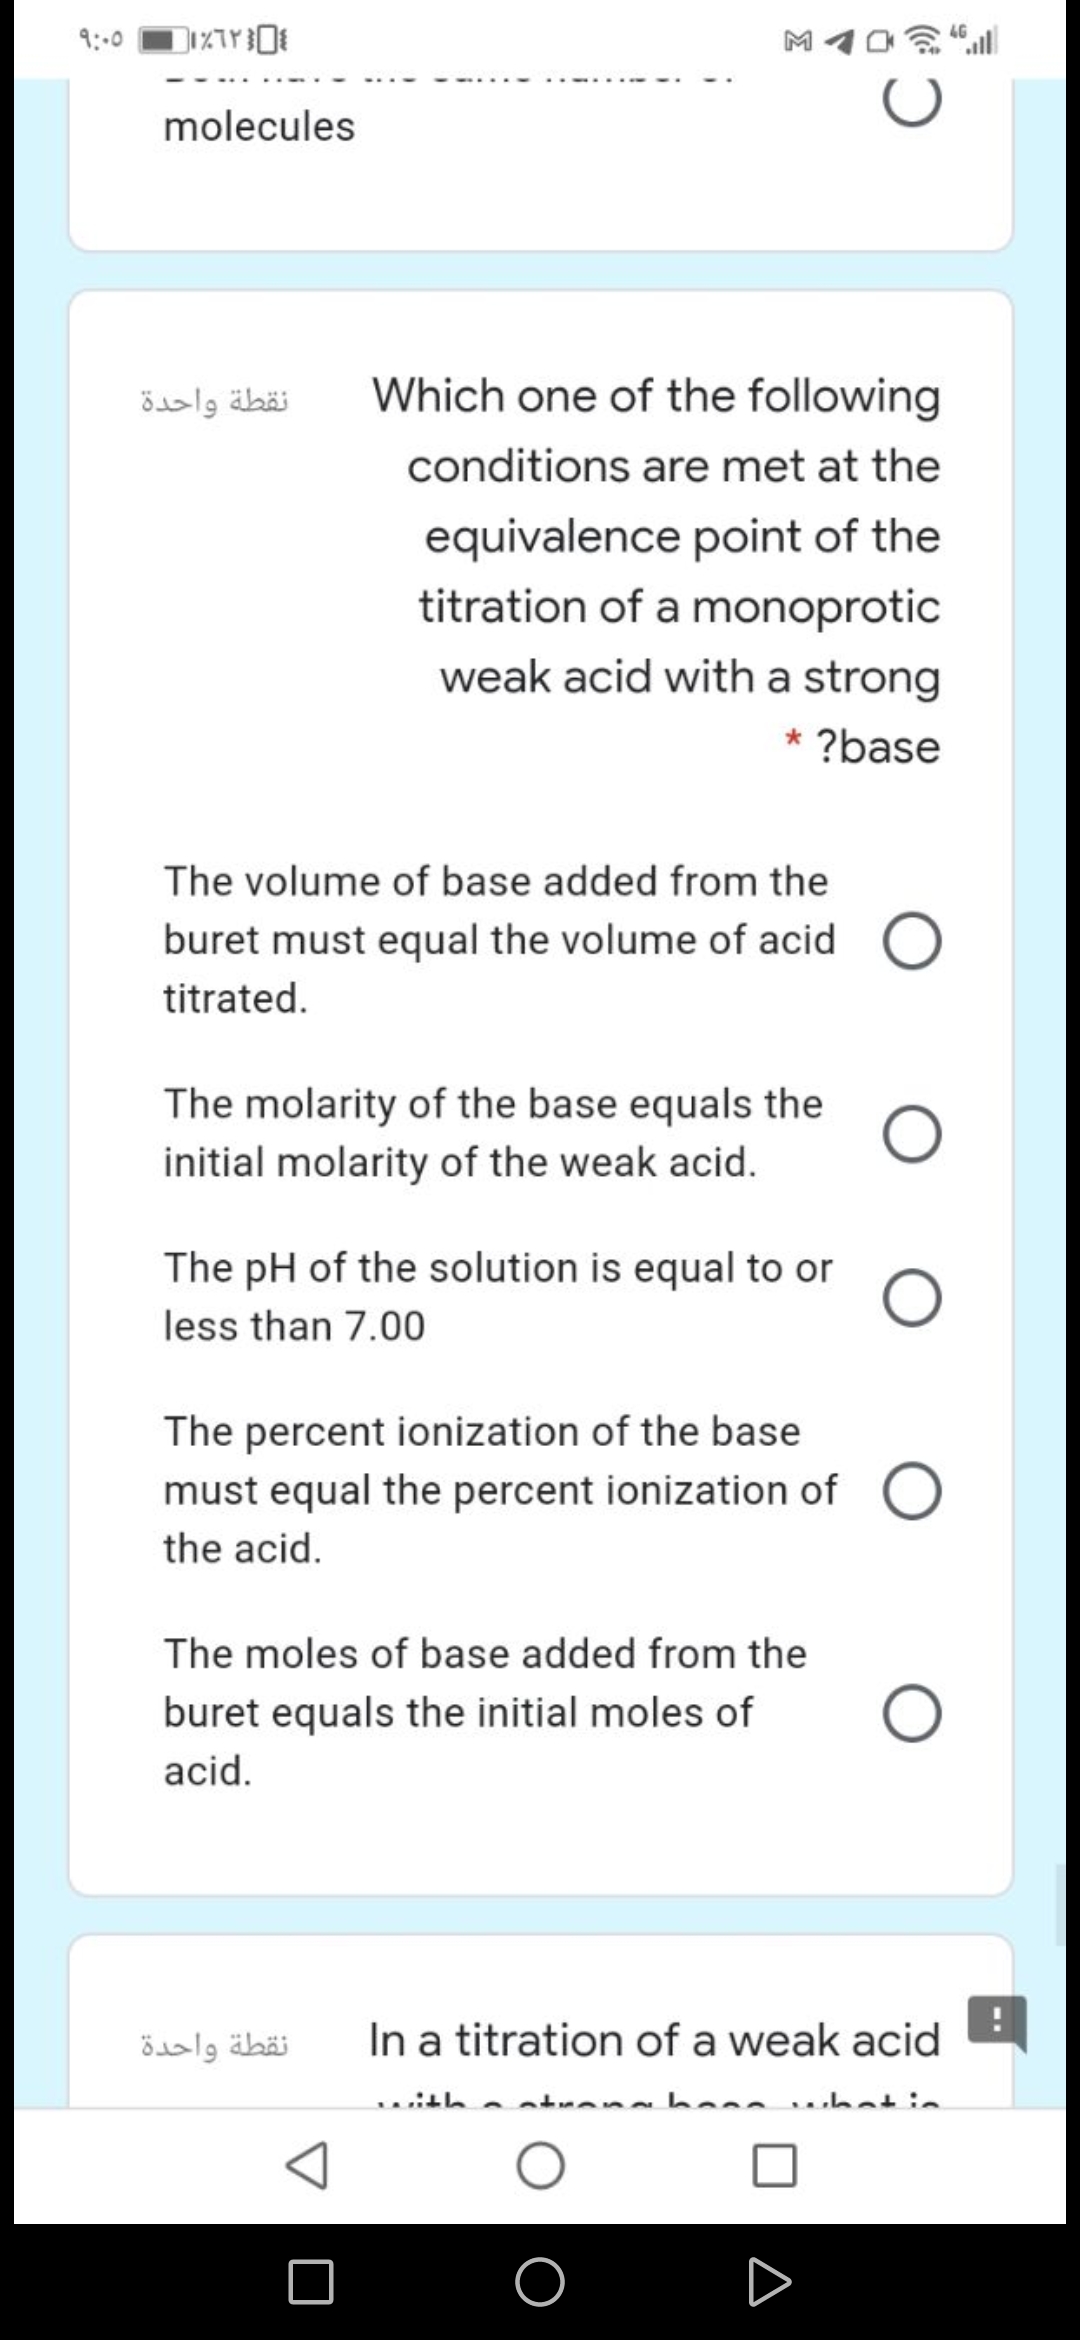 9:00
molecules
نقطة واحدة
Which one of the following
conditions are met at the
equivalence point of the
titration of a monoprotic
weak acid with a strong
* ?base
The volume of base added from the
buret must equal the volume of acid
titrated.
The molarity of the base equals the
initial molarity of the weak acid.
The pH of the solution is equal to or
less than 7.00
The percent ionization of the base
must equal the percent ionization of
the acid.
The moles of base added from the
buret equals the initial moles of
acid.
نقطة واحدة
In a titration of a weak acid
.ith
